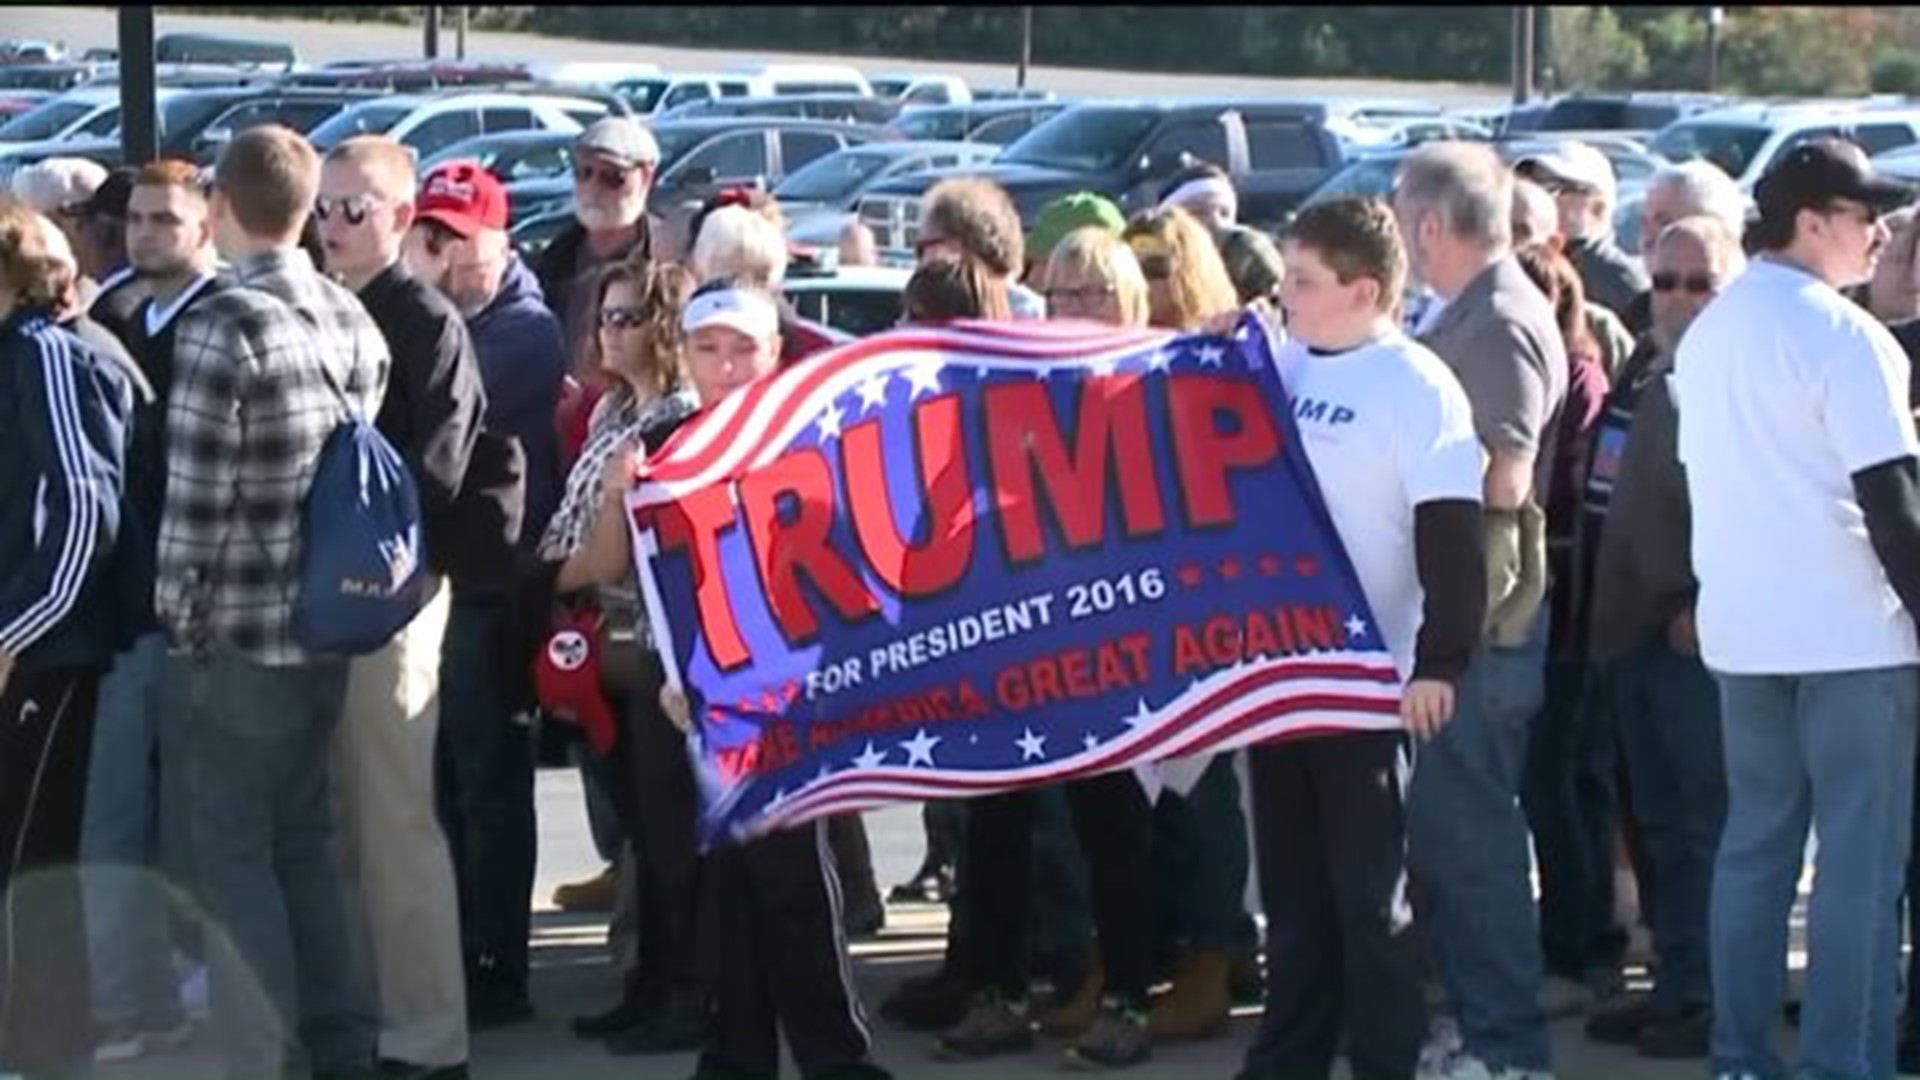 Thousands Stand in Line for Trump in Luzerne County